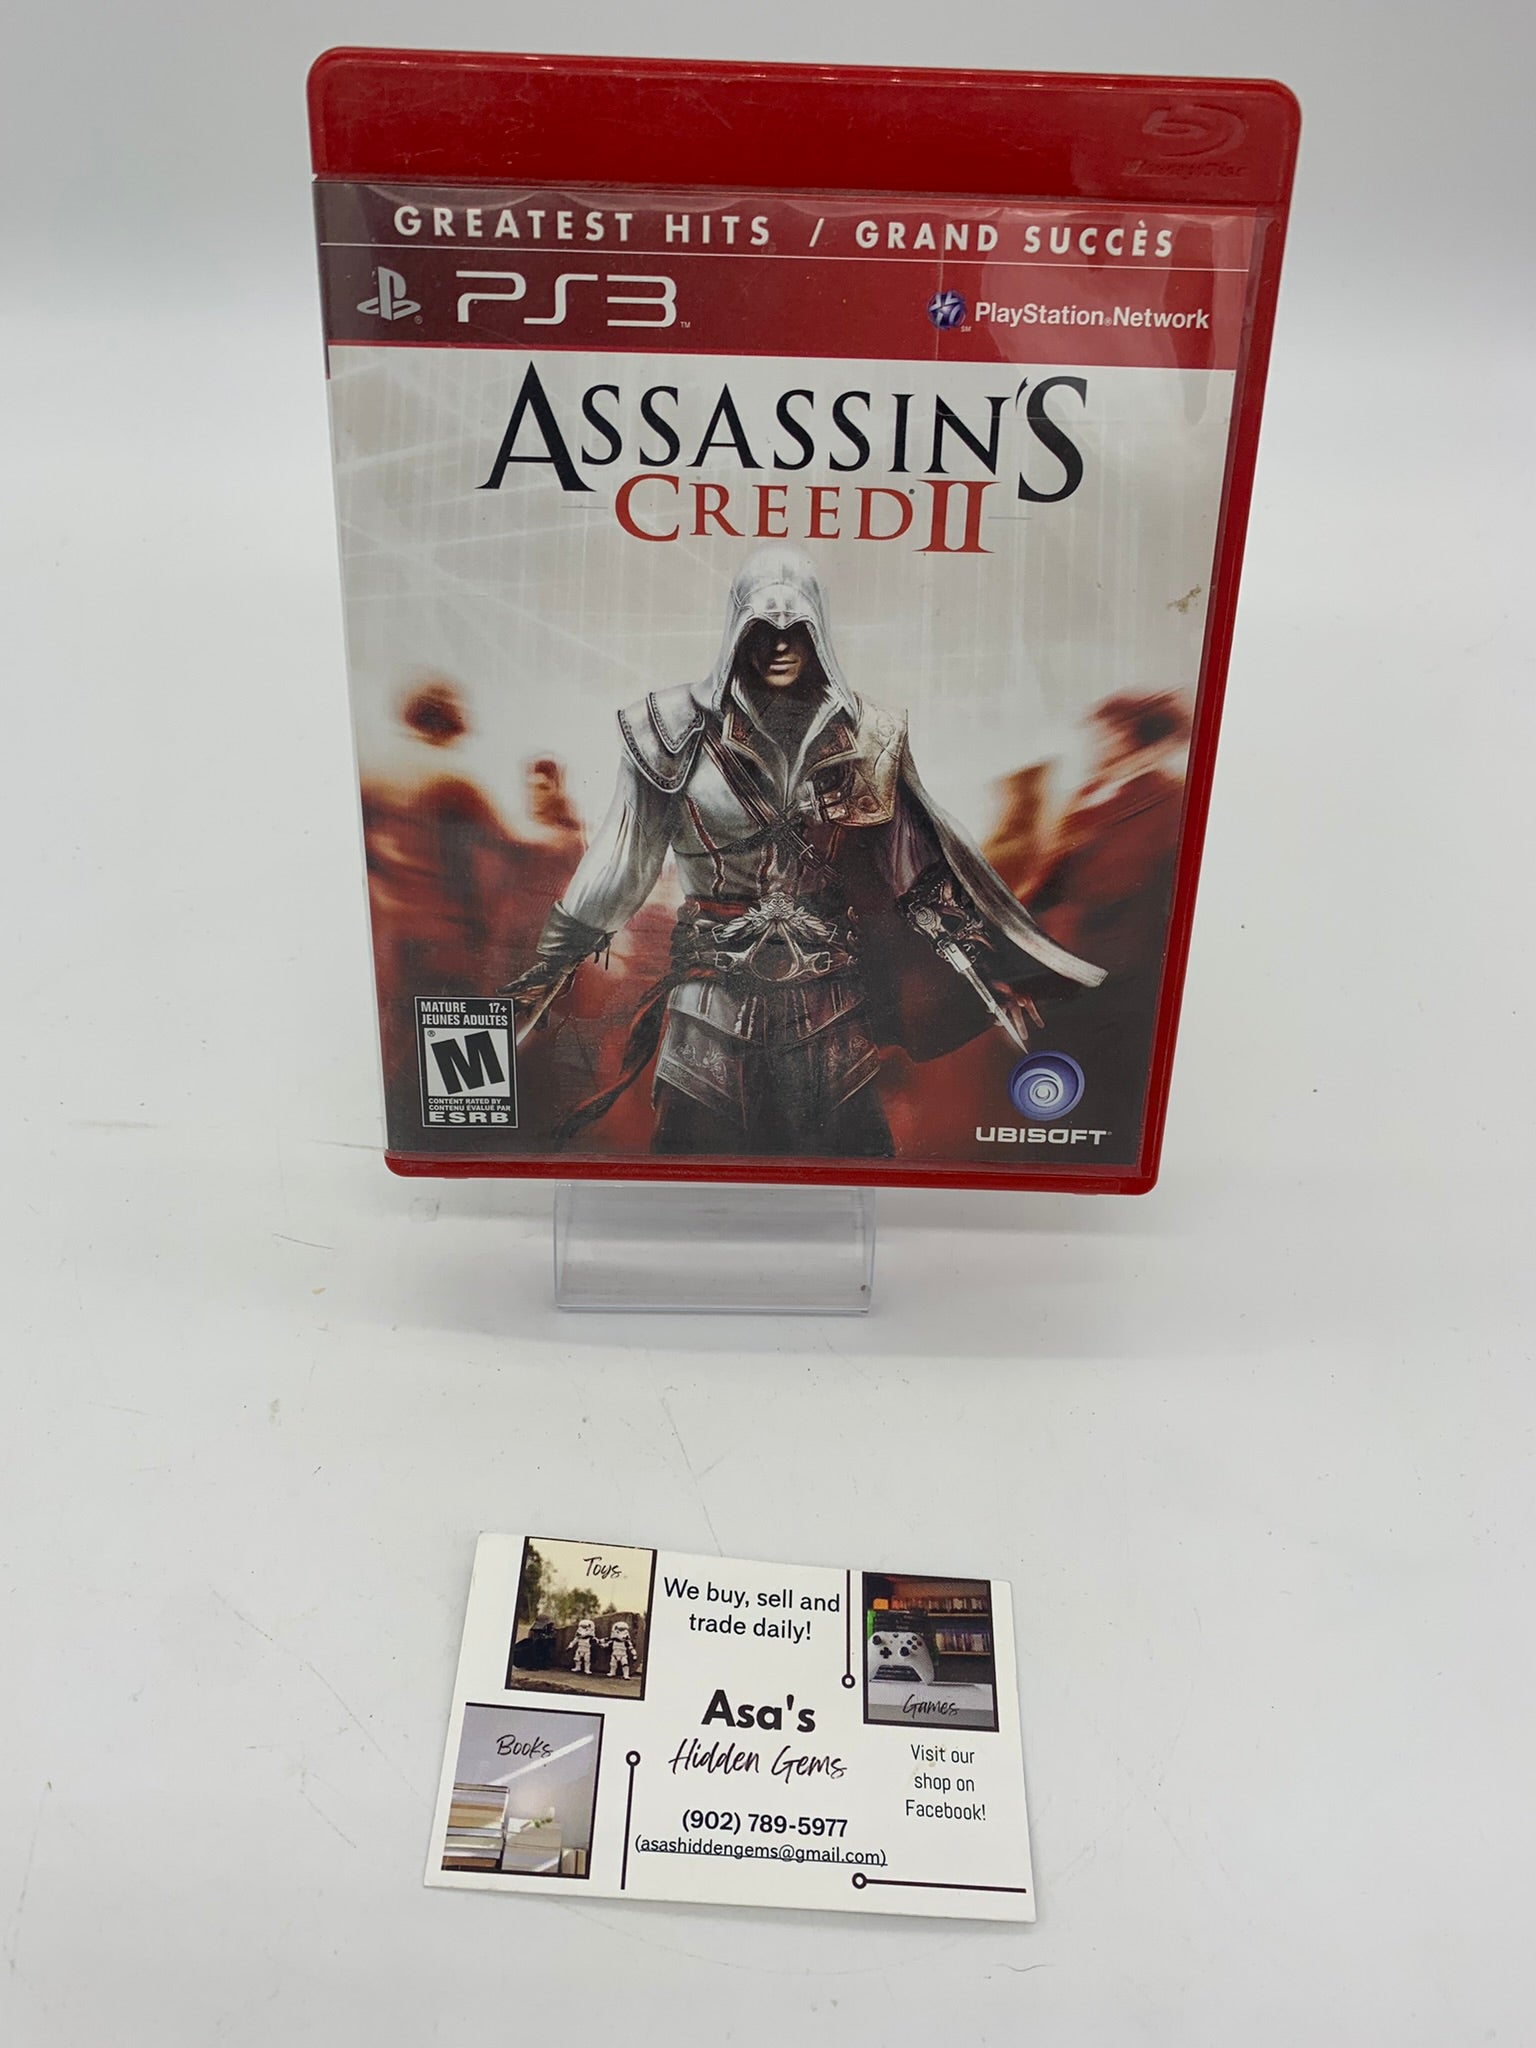  Assassin's Creed II - Greatest Hits edition - Playstation 3  (Renewed) : Video Games